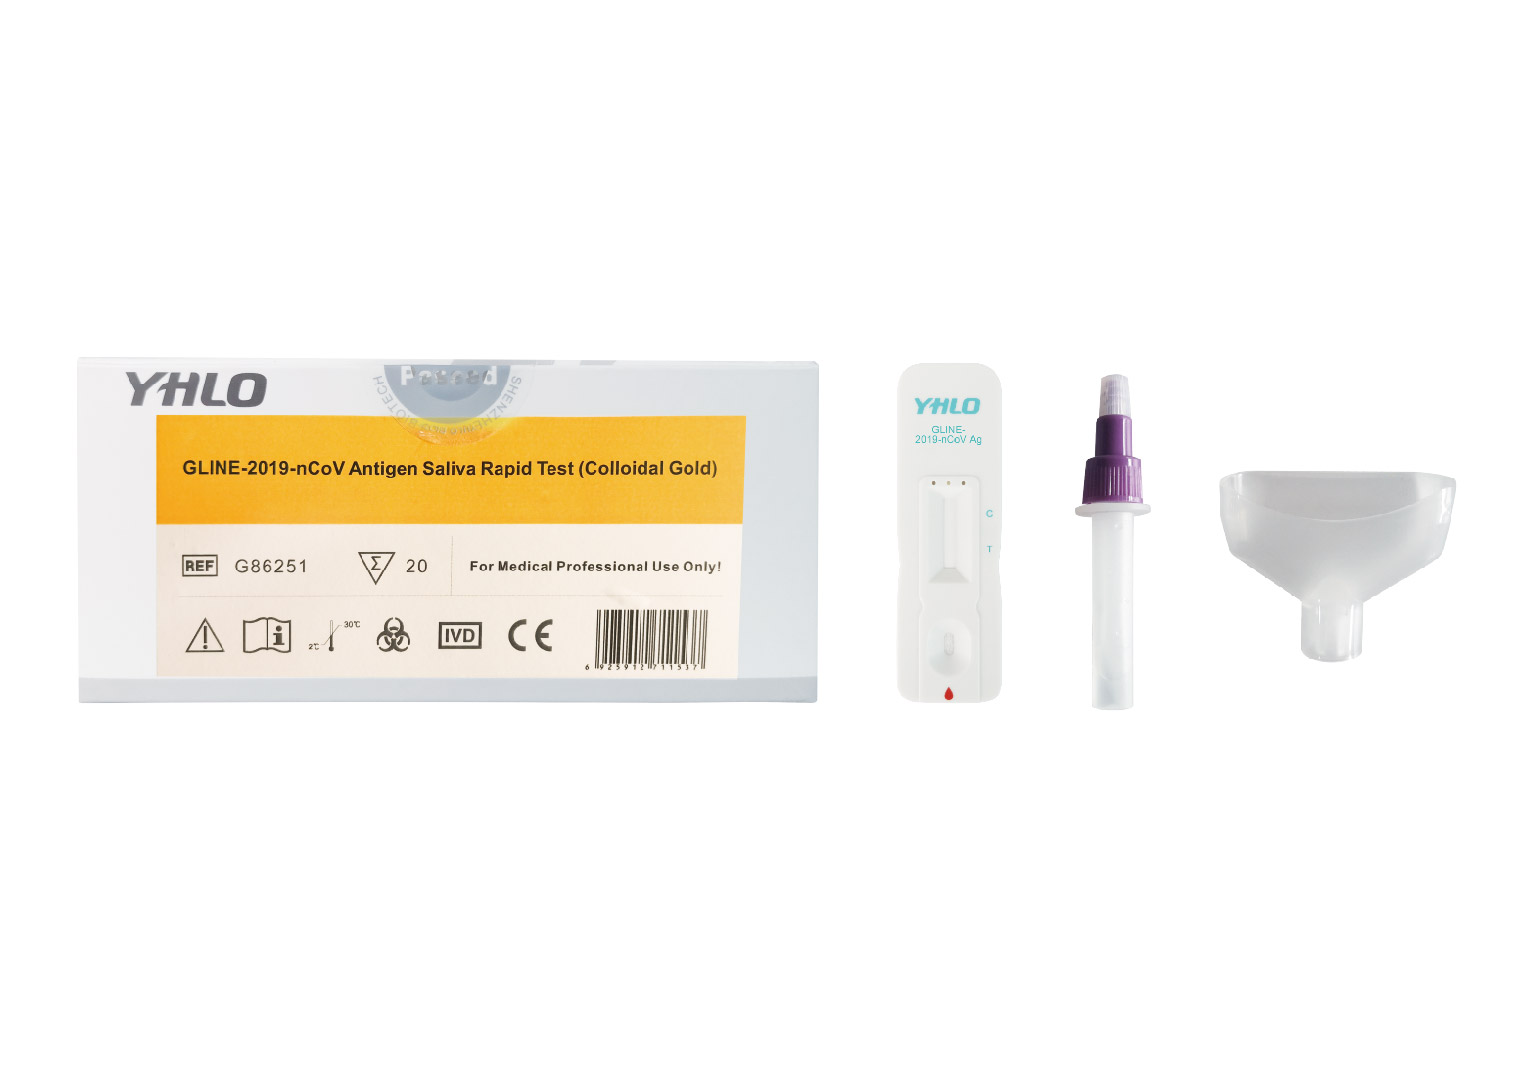 ArcanaBio receives a 20m ISK grant from Icelandic Technology Fund for a  Rapid COVID-19 Saliva Test